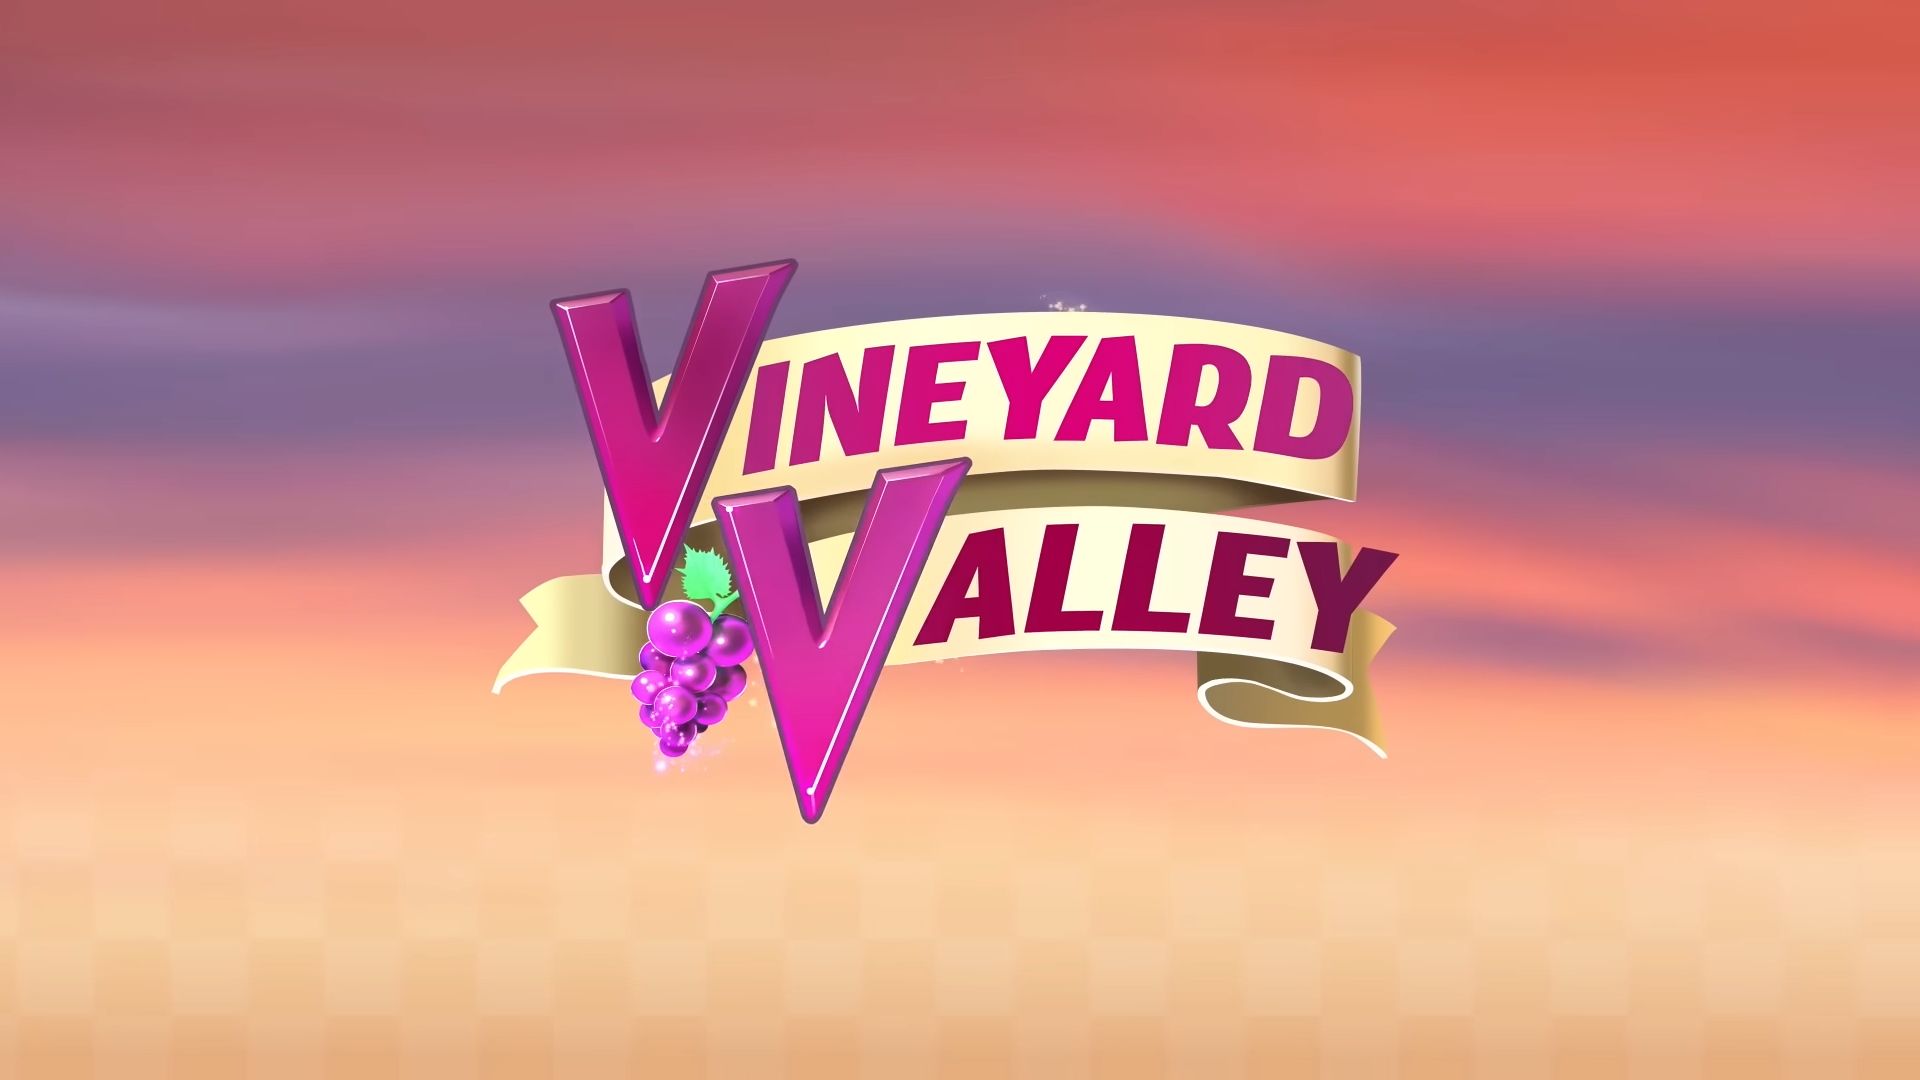 Full version of Android Narrative game apk Vineyard Valley NETFLIX for tablet and phone.